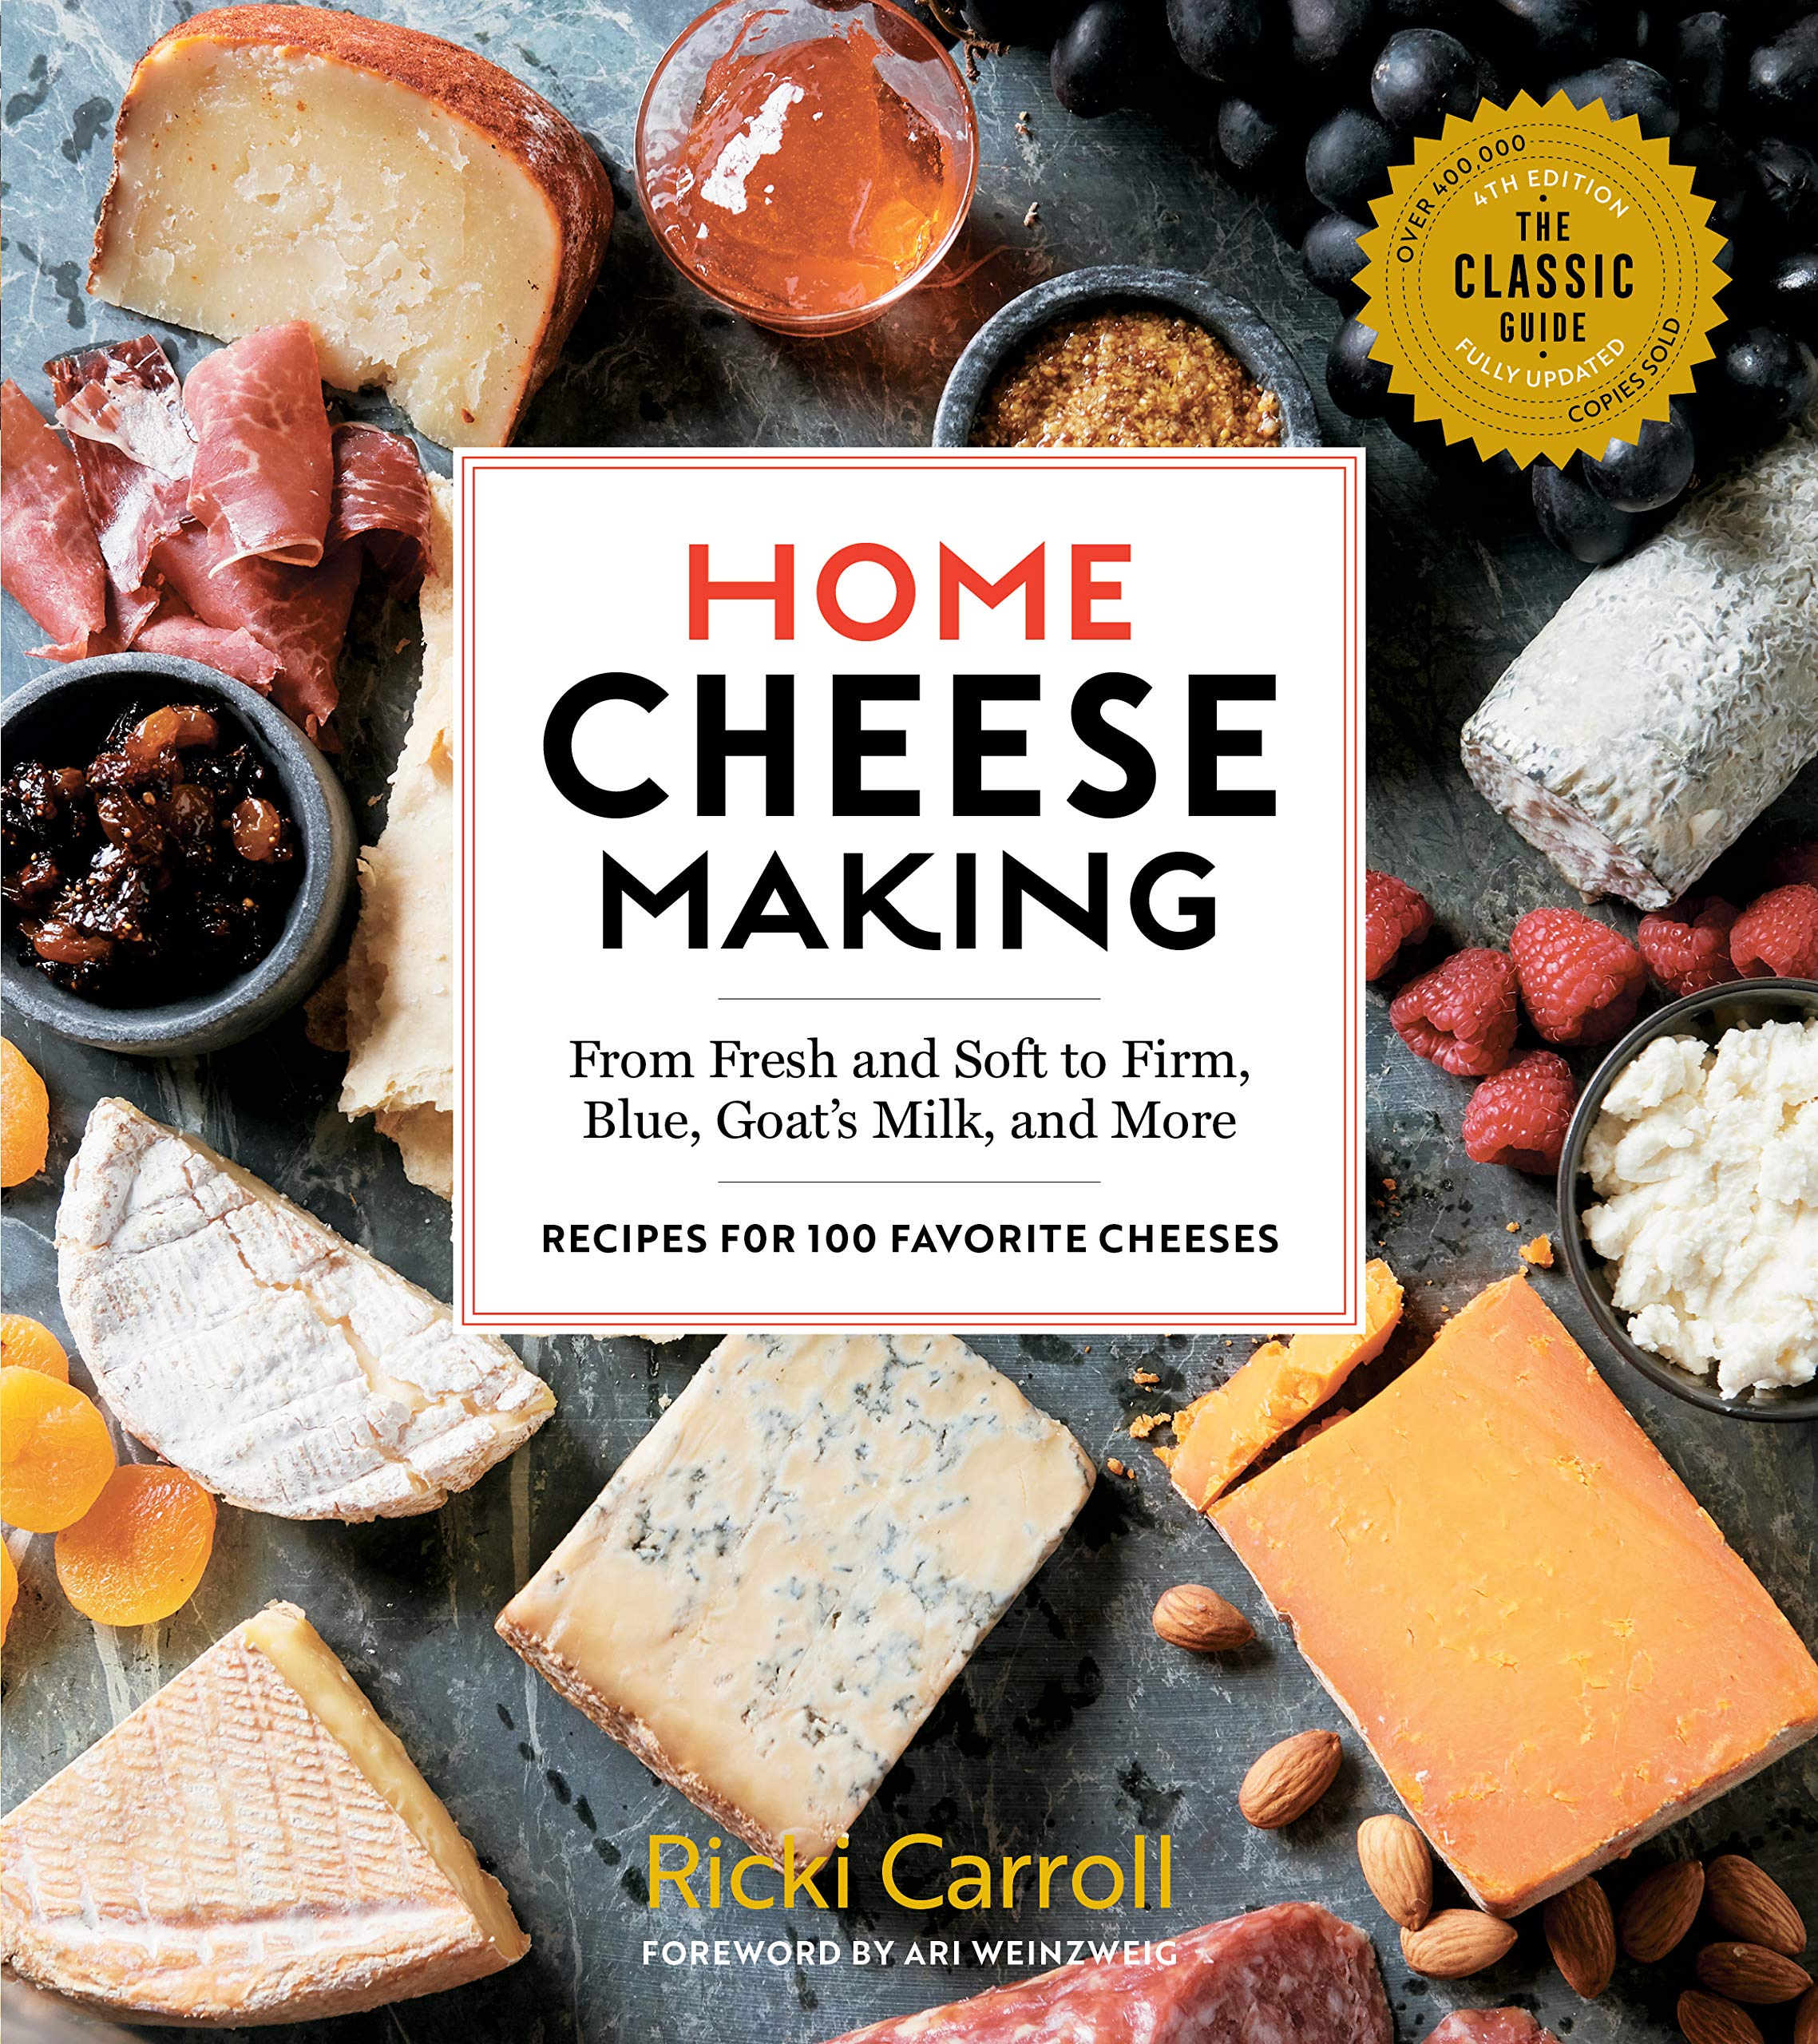 Home Cheese Making, 4th Edition: From Fresh and Soft to Firm, Blue, Goat’s Milk, and More; Recipes for 100 Favorite Cheeses (Ricki Carroll)